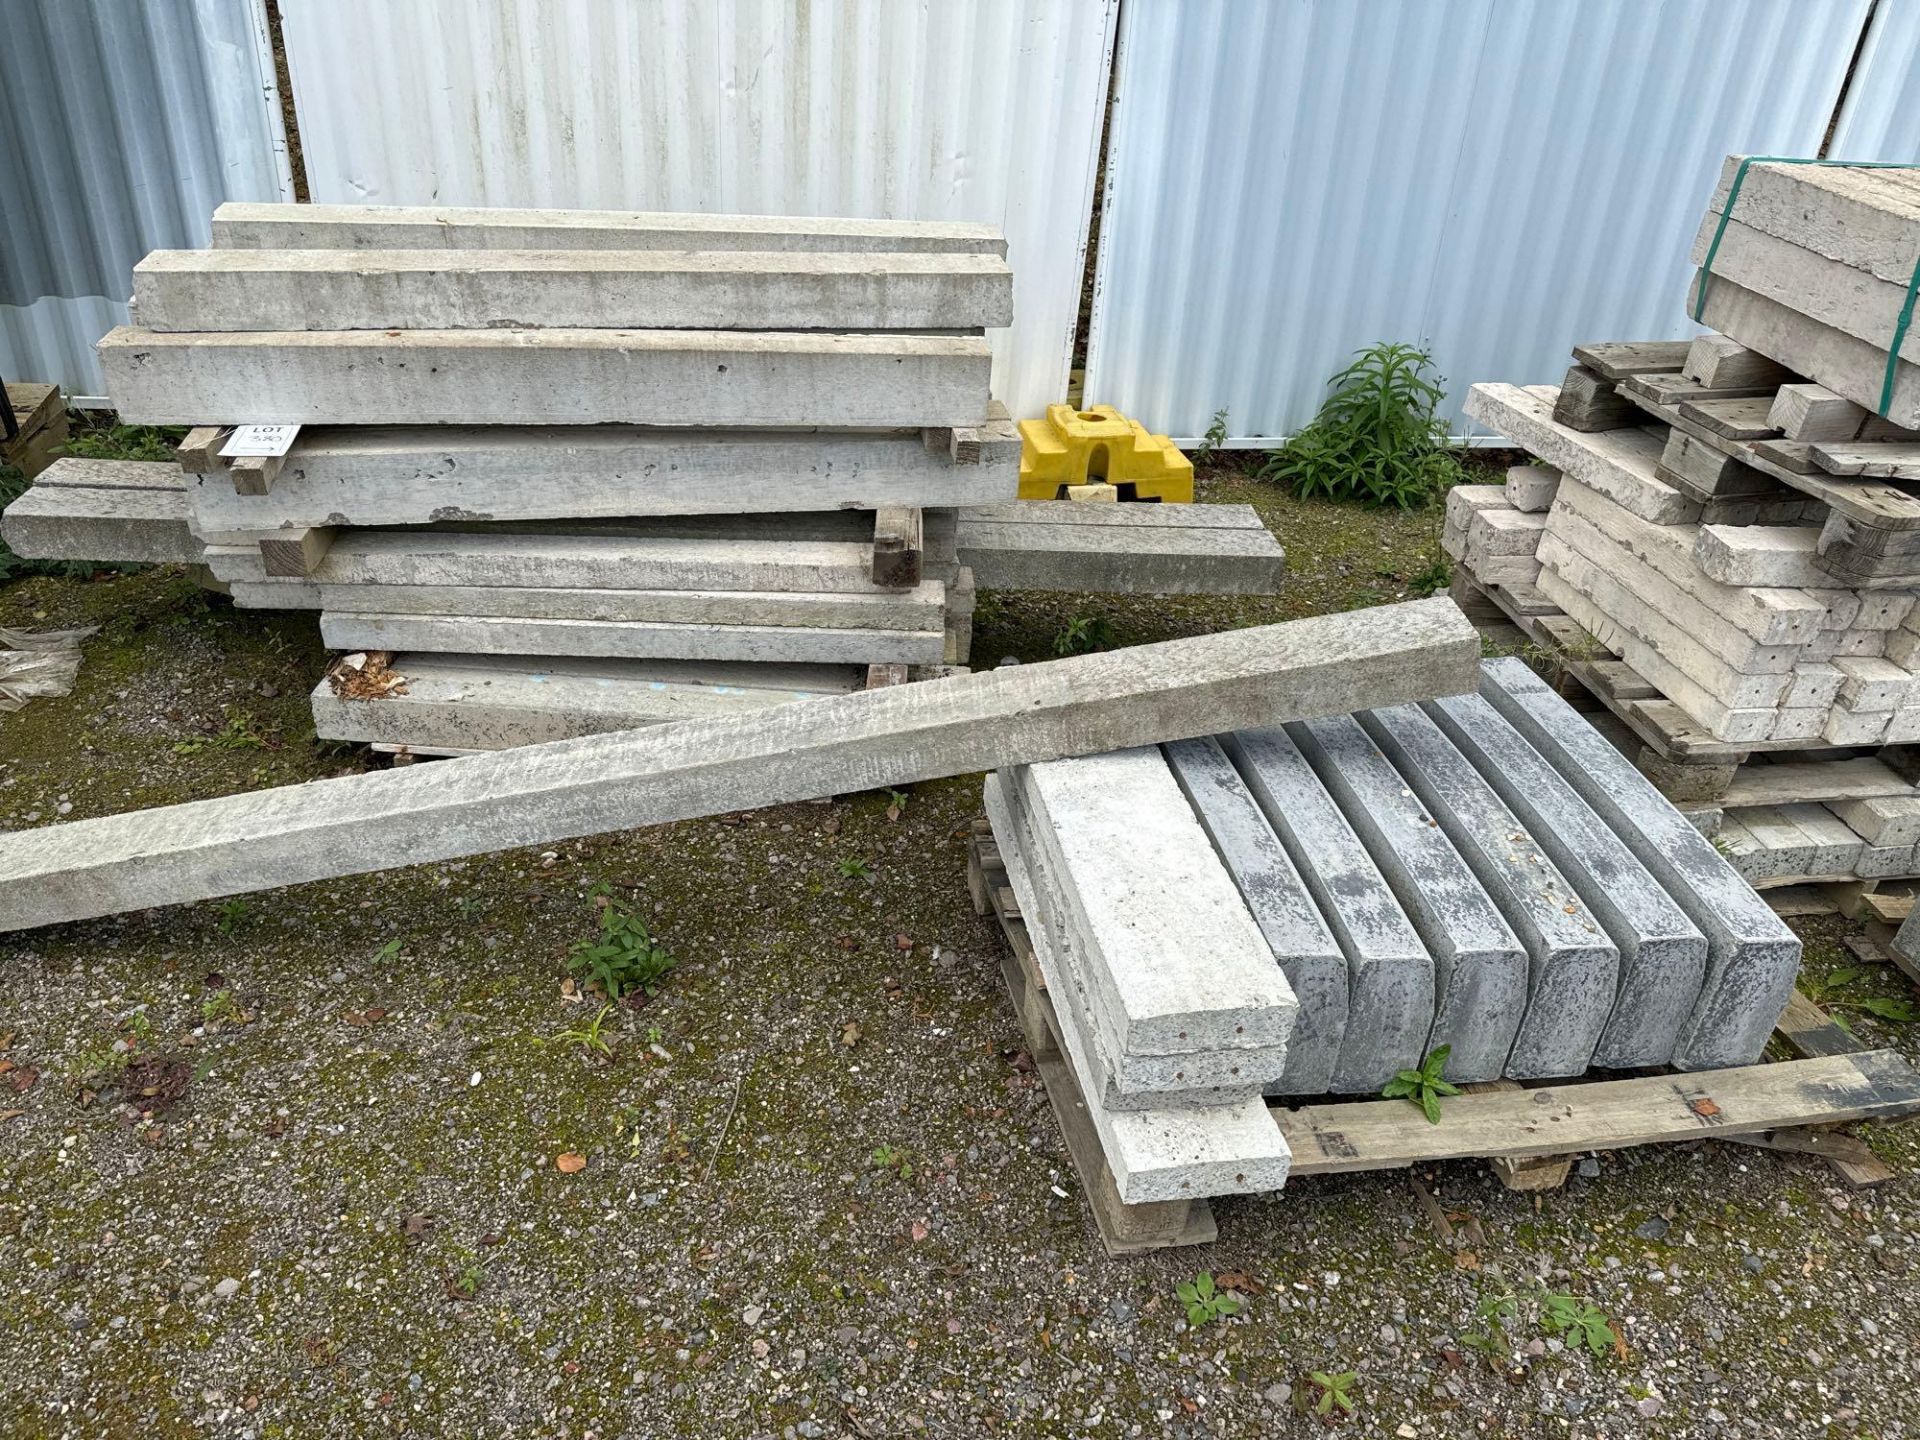 Various concrete lintels and kerb stones as lotted - Image 2 of 4